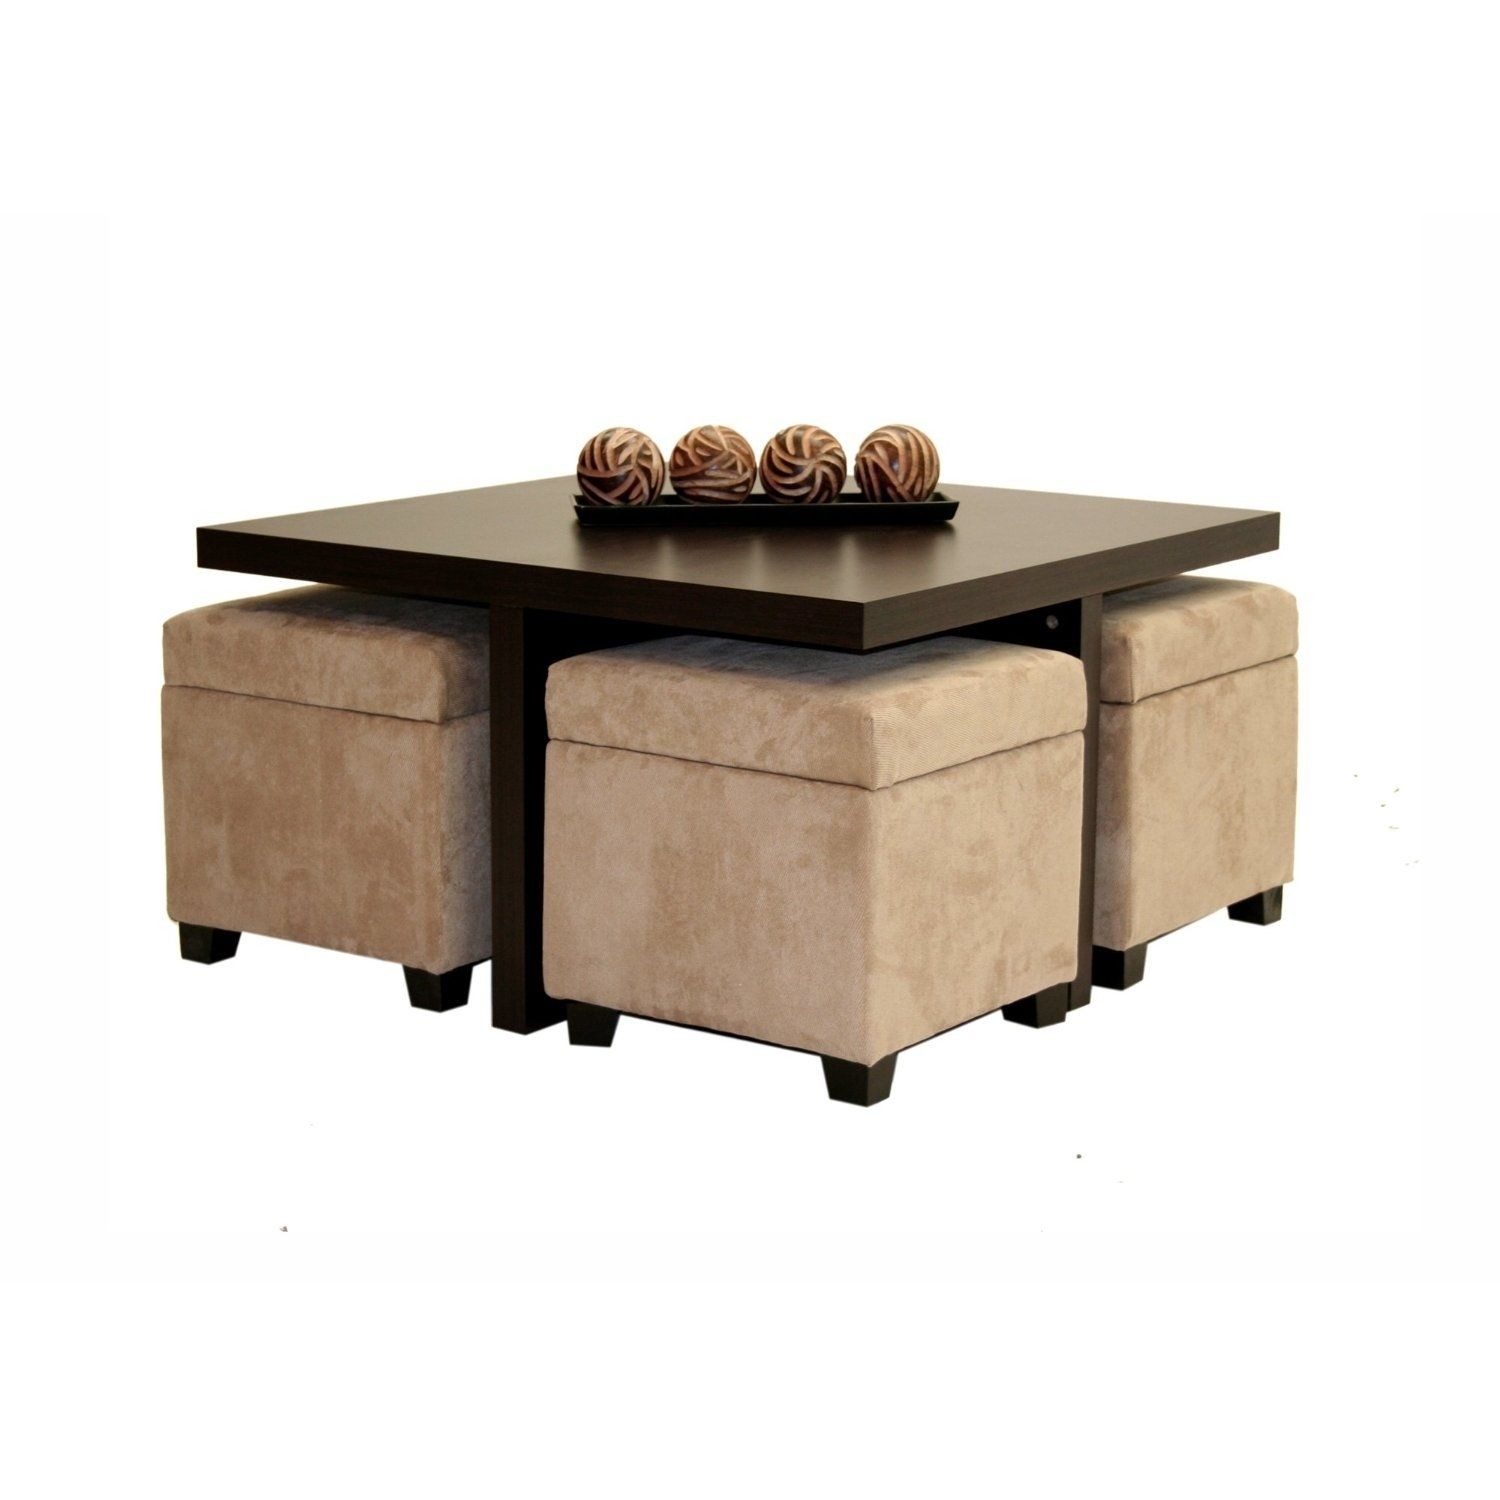 Featured image of post Ottoman Table Tops : Find ottoman in coffee tables | buy or sell coffee tables, ottomans, poufs, side tables &amp; more in featuring a tufted velvet body with a tempered glass top perfect to use as a stylish ottoman or coffee.